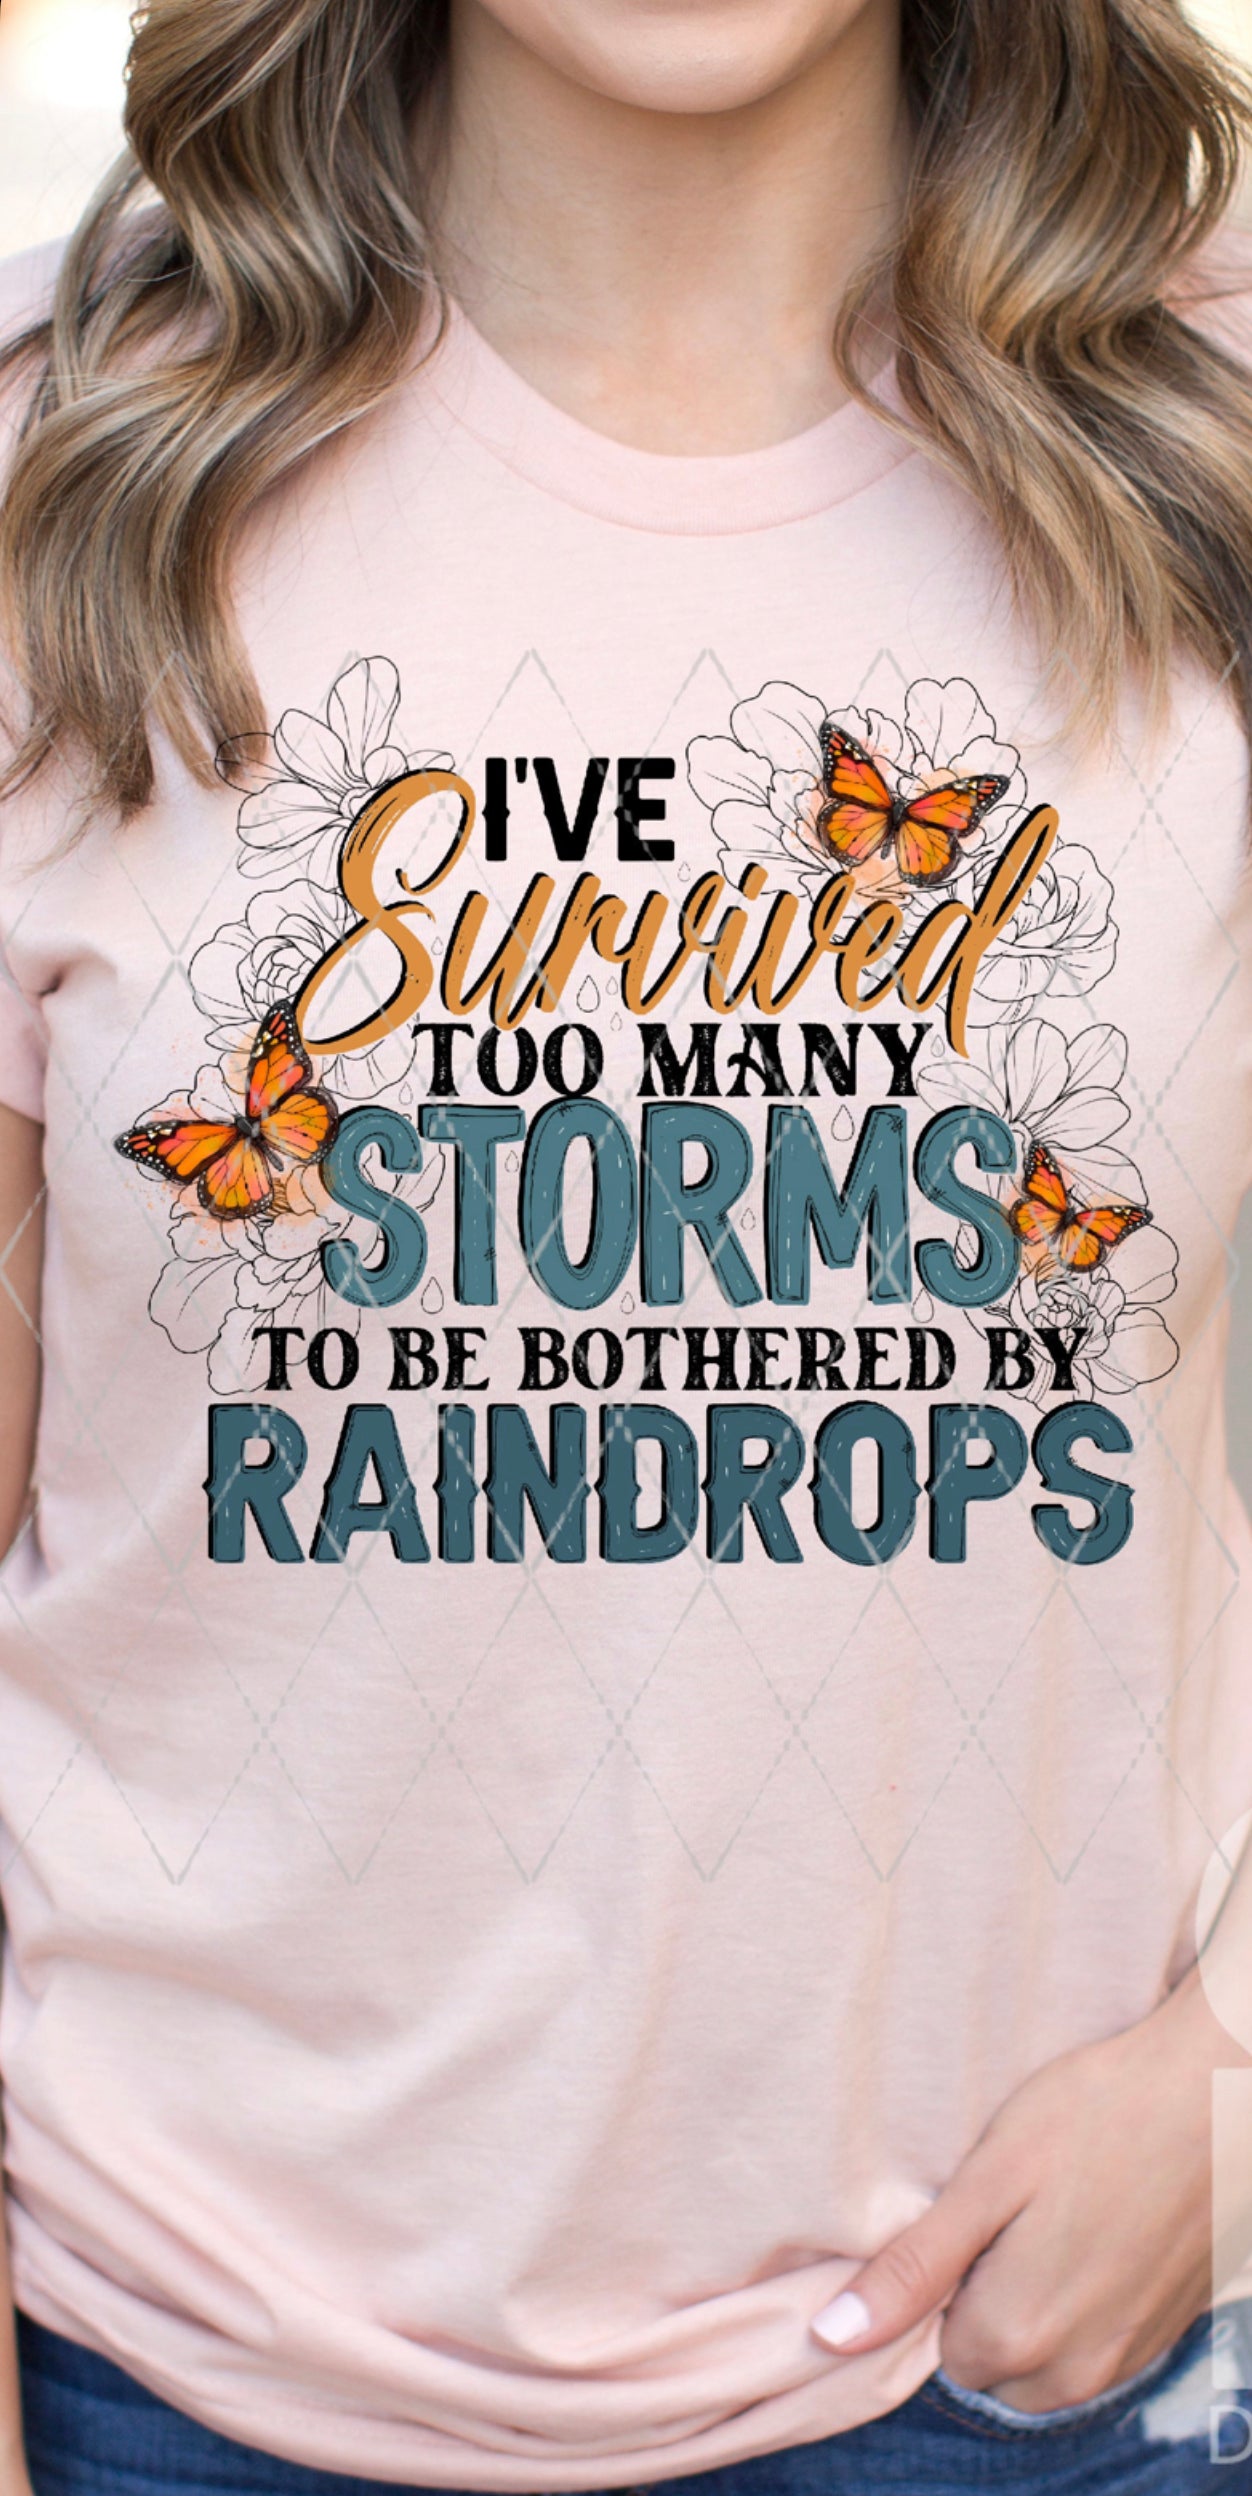 Ive Survived Too Many Storms - AnnRose Boutique